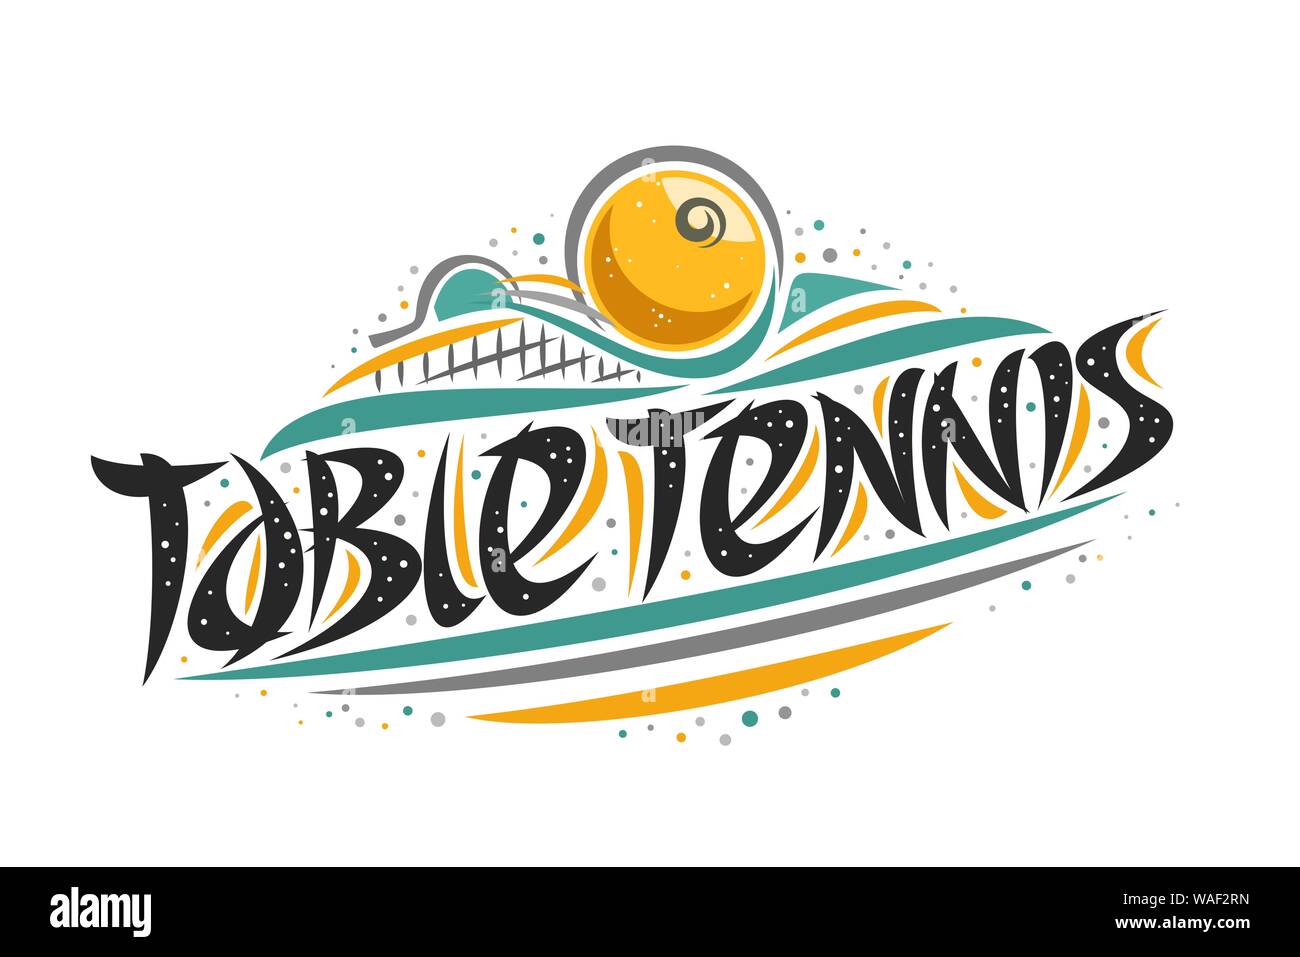 Vector logo for Table Tennis, outline creative illustration of hitting ball in goal, original decorative brush typeface for words table tennis, simpli Stock Vector